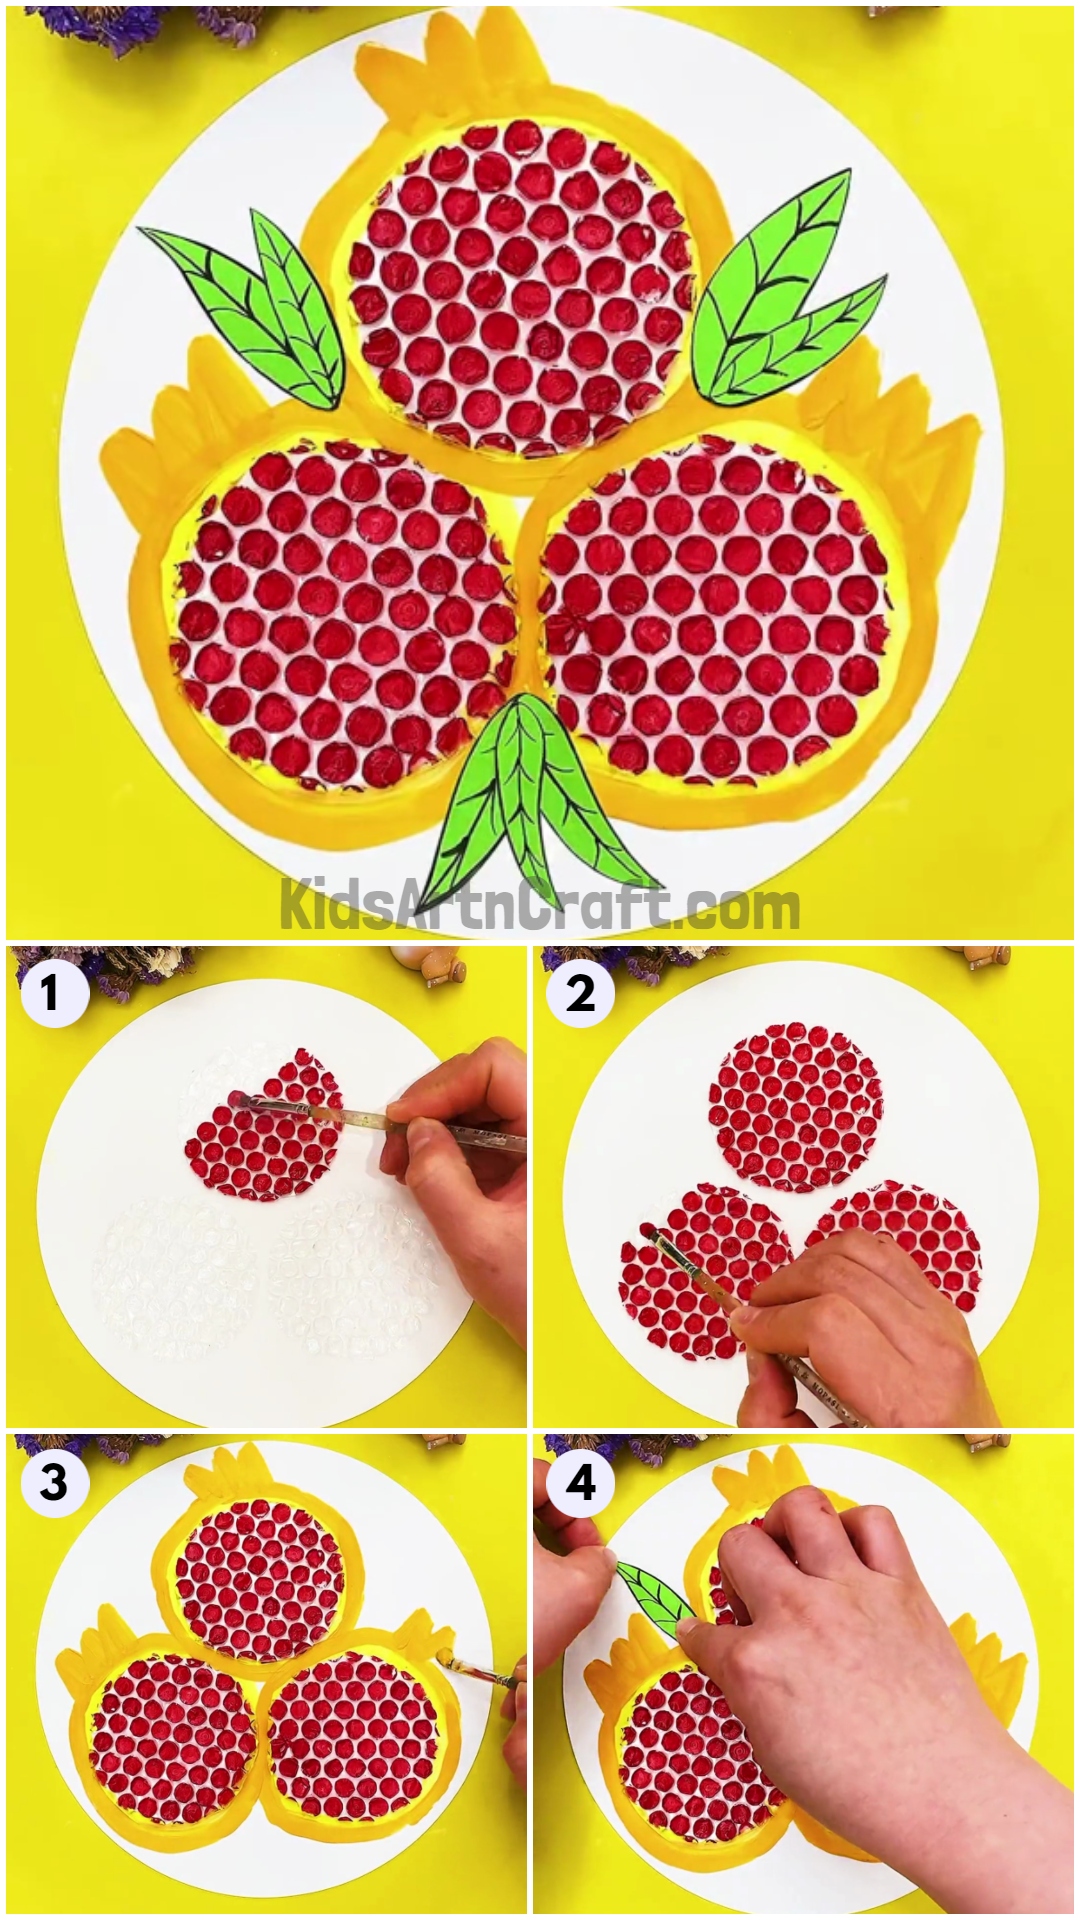 Learn to make Bubble Wrap Printed Pomegranate Craft